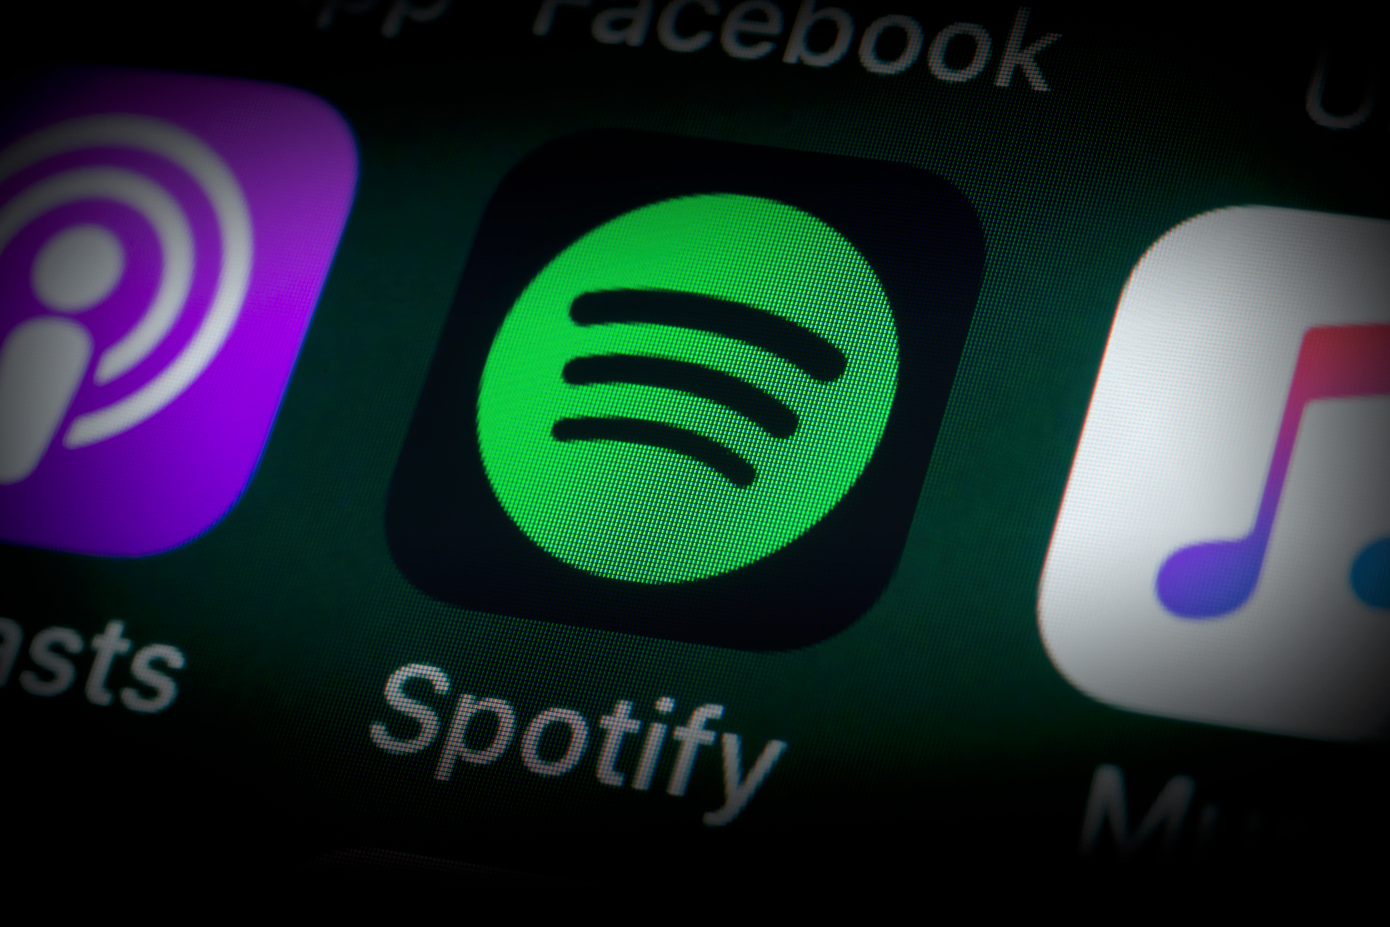 You will be able to subscribe to Spotify without going through Google payment

